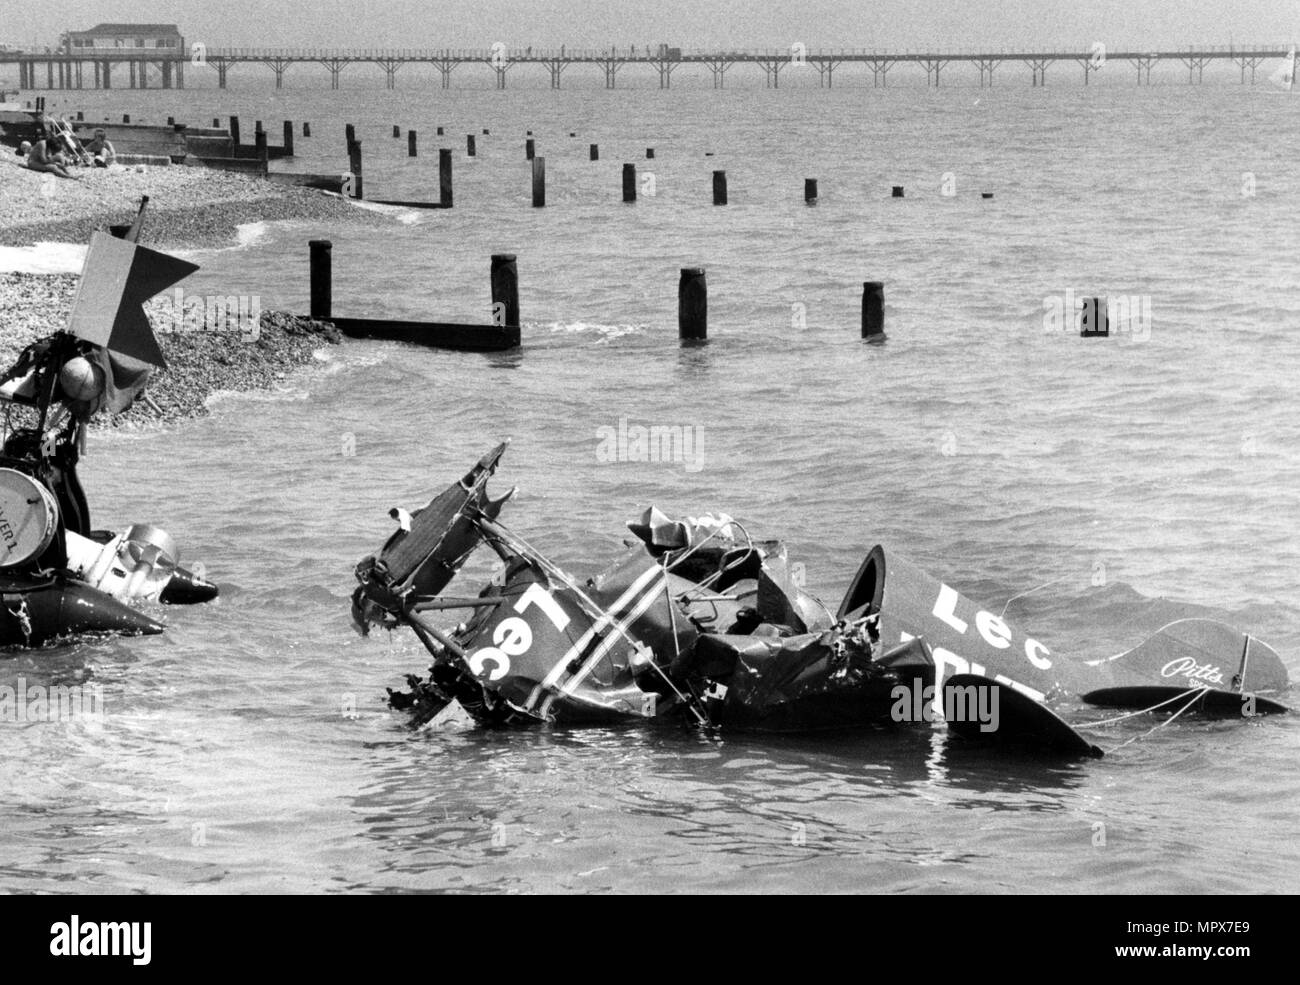 THE WRECKAGE OF THE PITTS SPECIAL PLANE IN WHICH RACING DRIVER DAVID PURLEY WAS KILLED IS BROUGHT ASHORE AT BOGNOR REGIS. 1983 Stock Photo